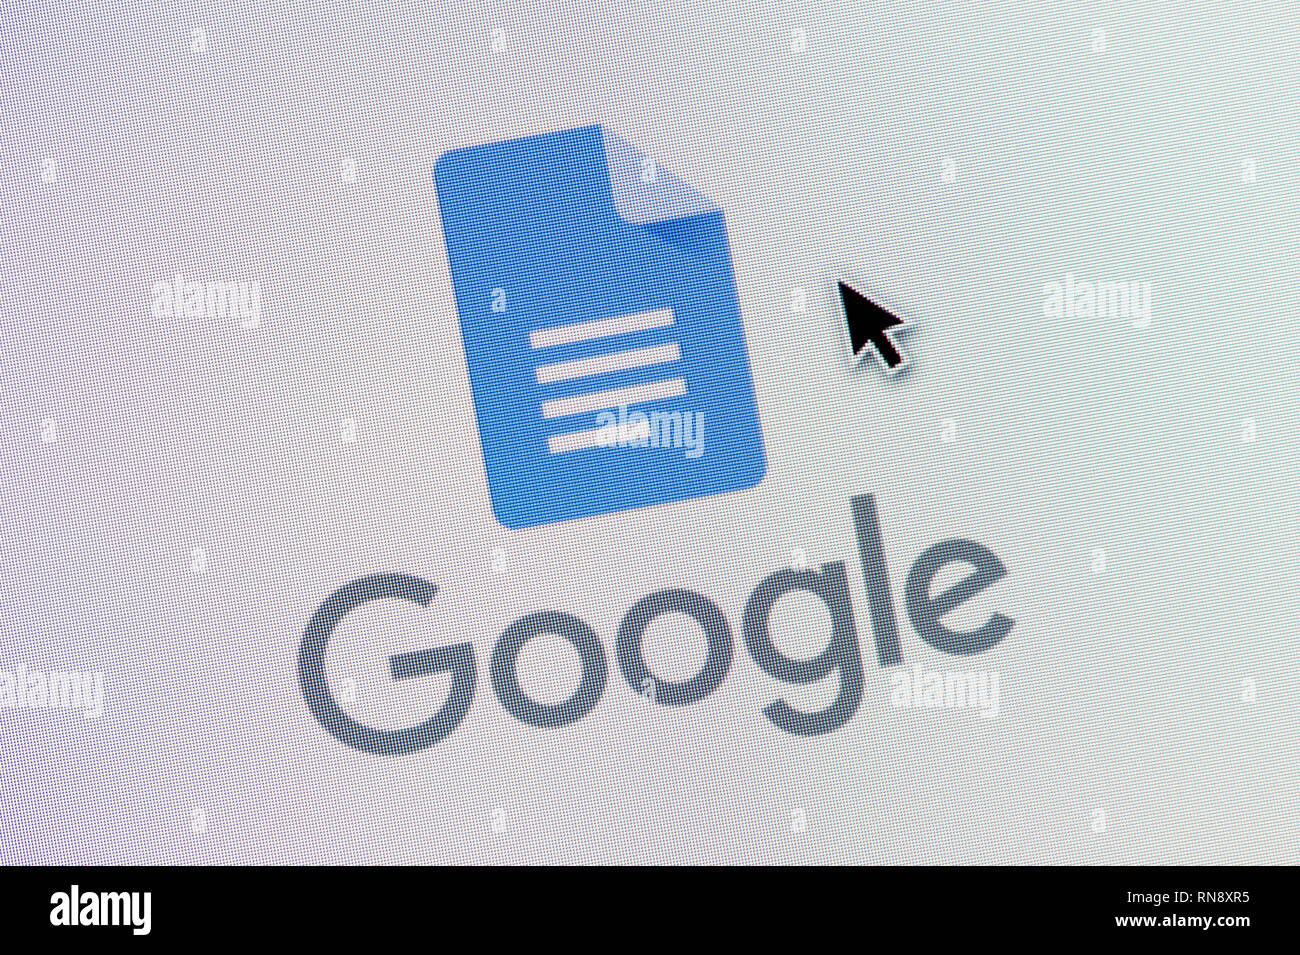 The logo of Google Docs is seen on a computer screen along with a mouse cursor (Editorial use only) Stock Photo